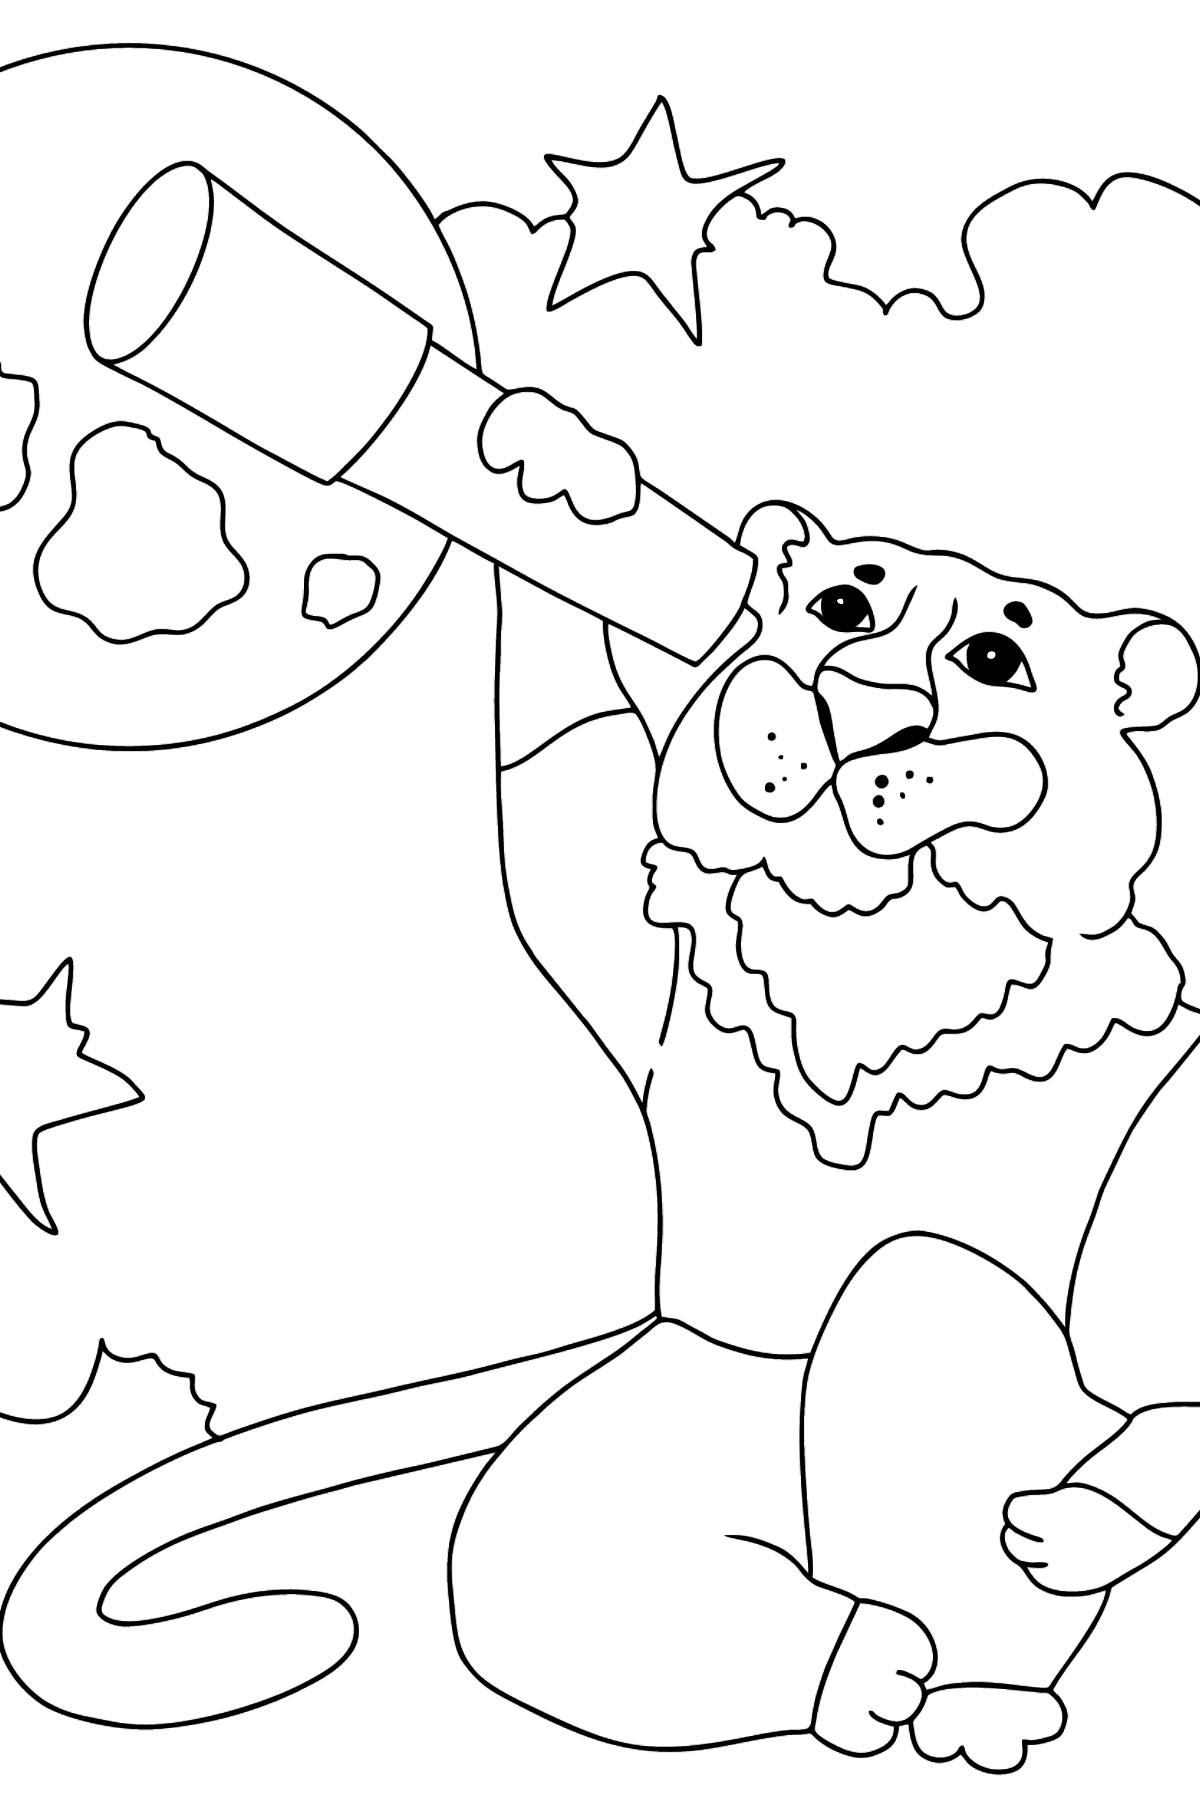 Coloring Page - A Tiger is Gazing at the Stars - Coloring Pages for Kids